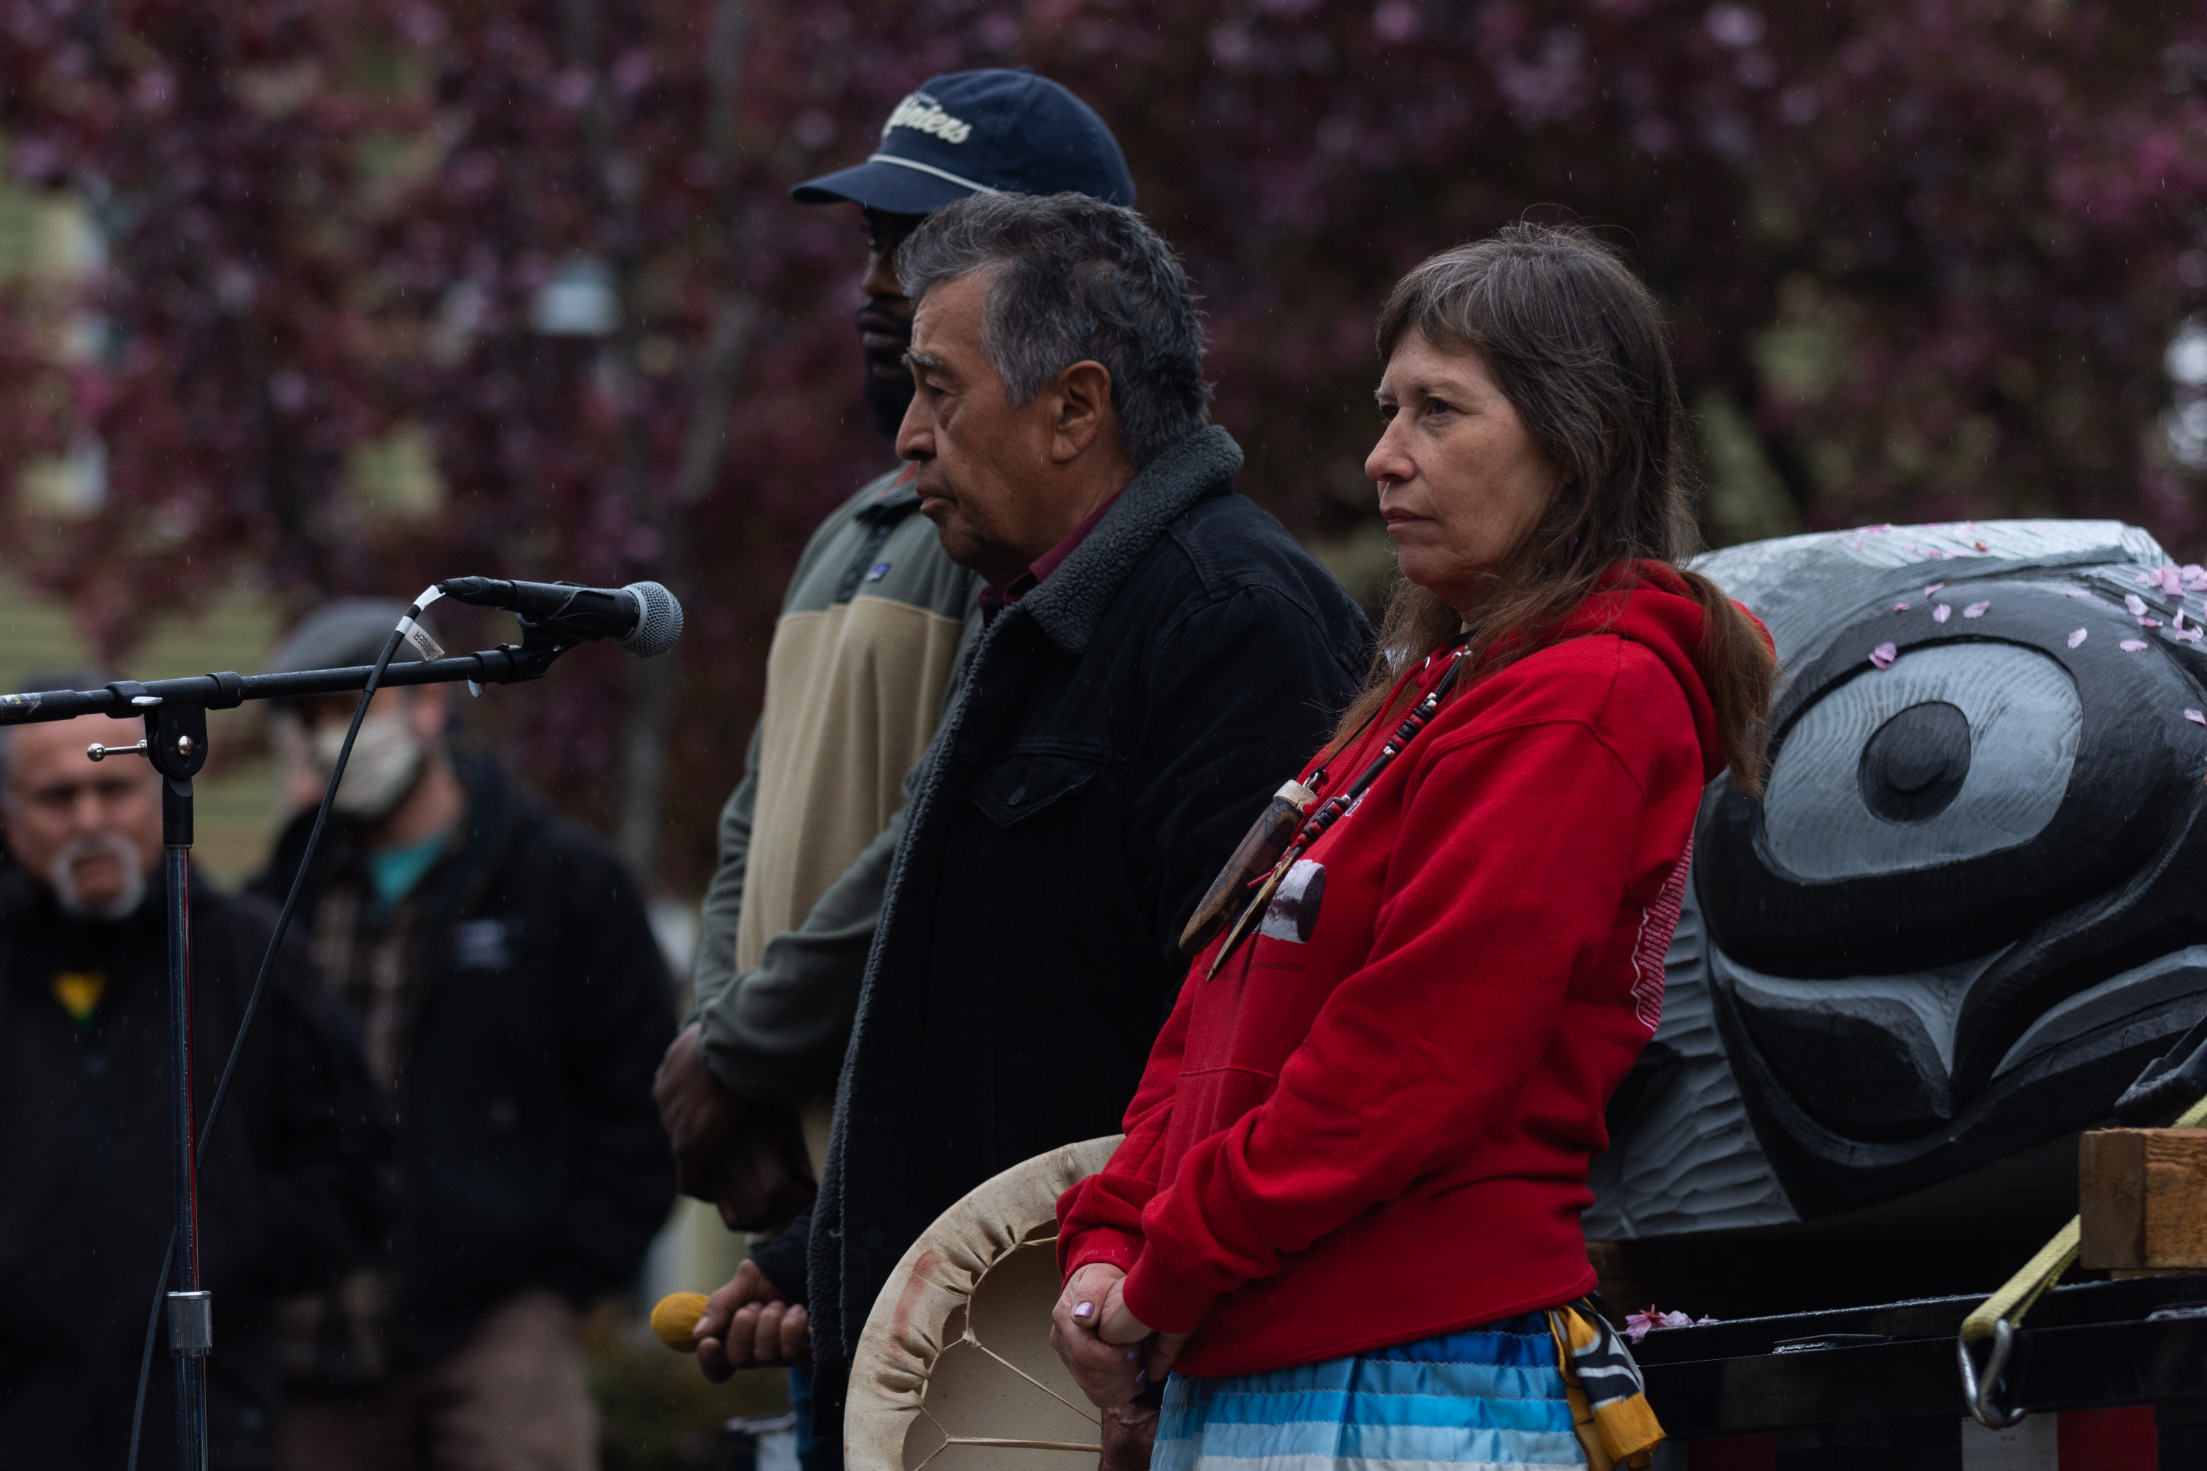 Lummi Tribal members Siam'el wit, right, and Doug James joined by fly angler Jian Lawrence offer prayer and song to bless the totem pole at the The Snake River to Salish Sea Spirit of the Waters totem pole journey launch Tuesday, May 3, 2022 at Bellingham Unitarian Fellowship in Bellingham, Wash. (photo/Natasha Brennan for McClatchy)